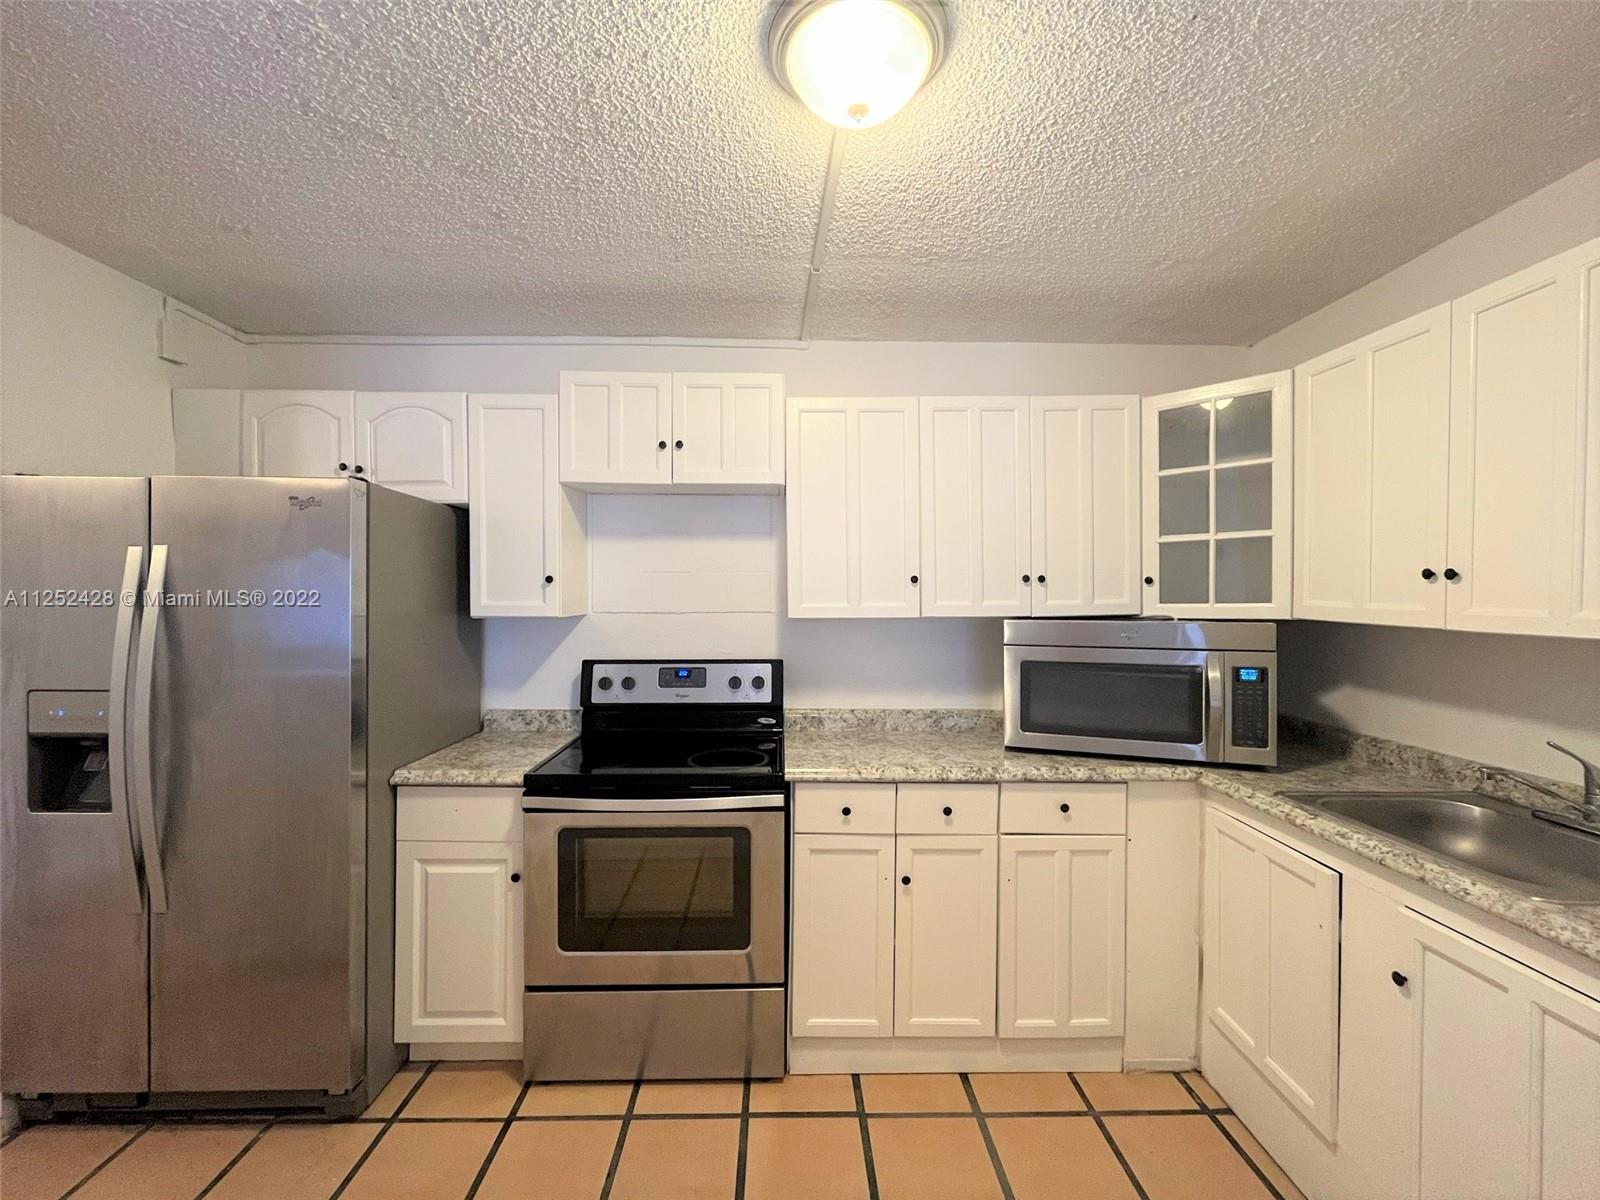 Don't miss this Spacious 2 bedroom 1.5 Bath with a large Laundry/Storage room, freshly painted and stainless steel appliances. This is a ground floor corner unit. Walking distance from shopping centers located along US-1. Great investment opportunity with rentals in the community averaging $1,500 monthly.